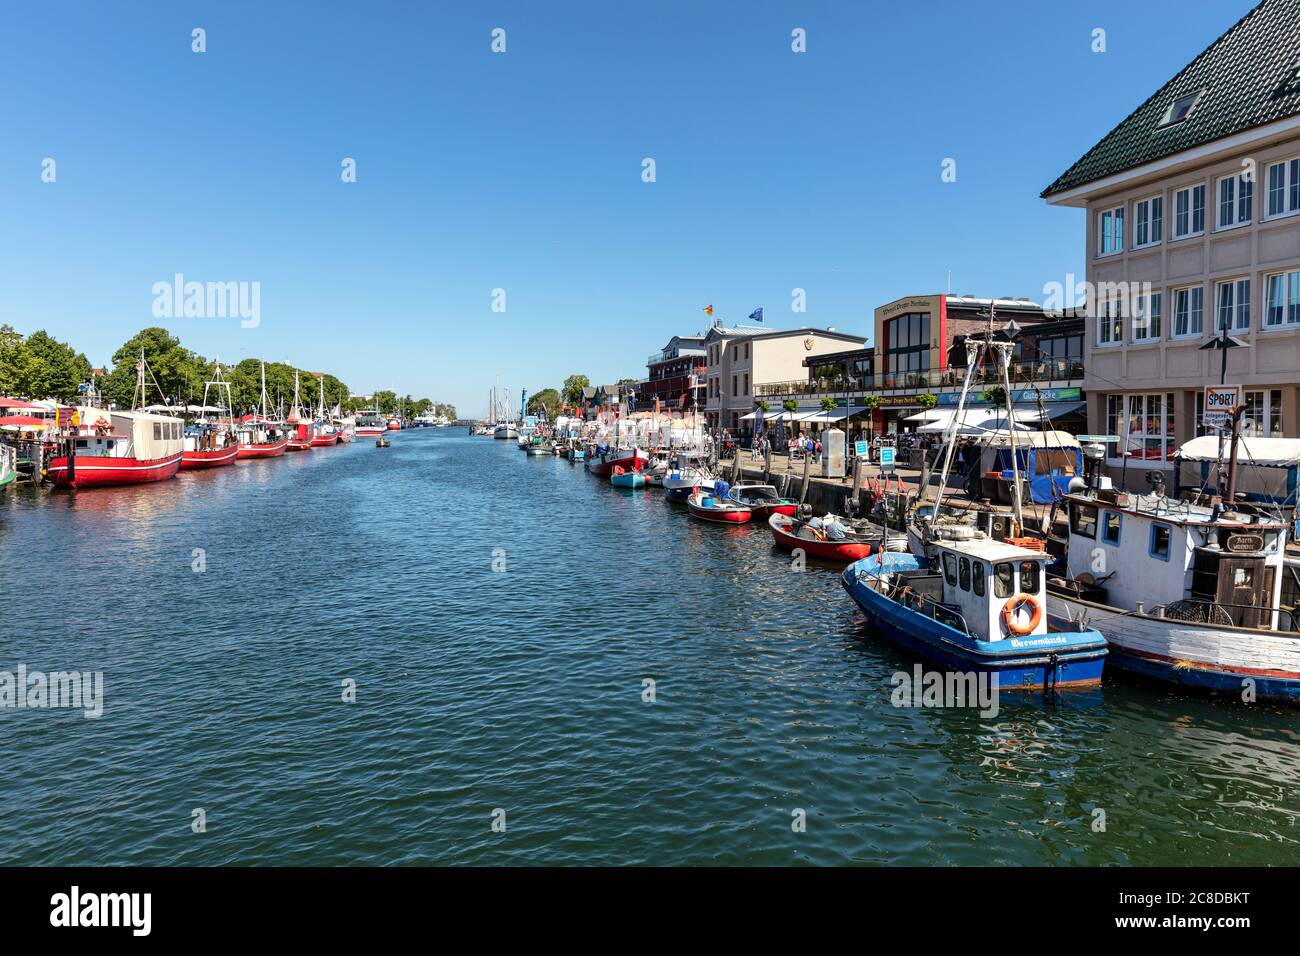 canal called ‘Alter Strom’ (Old Channel) in the Warnemünde district of the city of Rostock in Mecklenburg, Germany Stock Photo